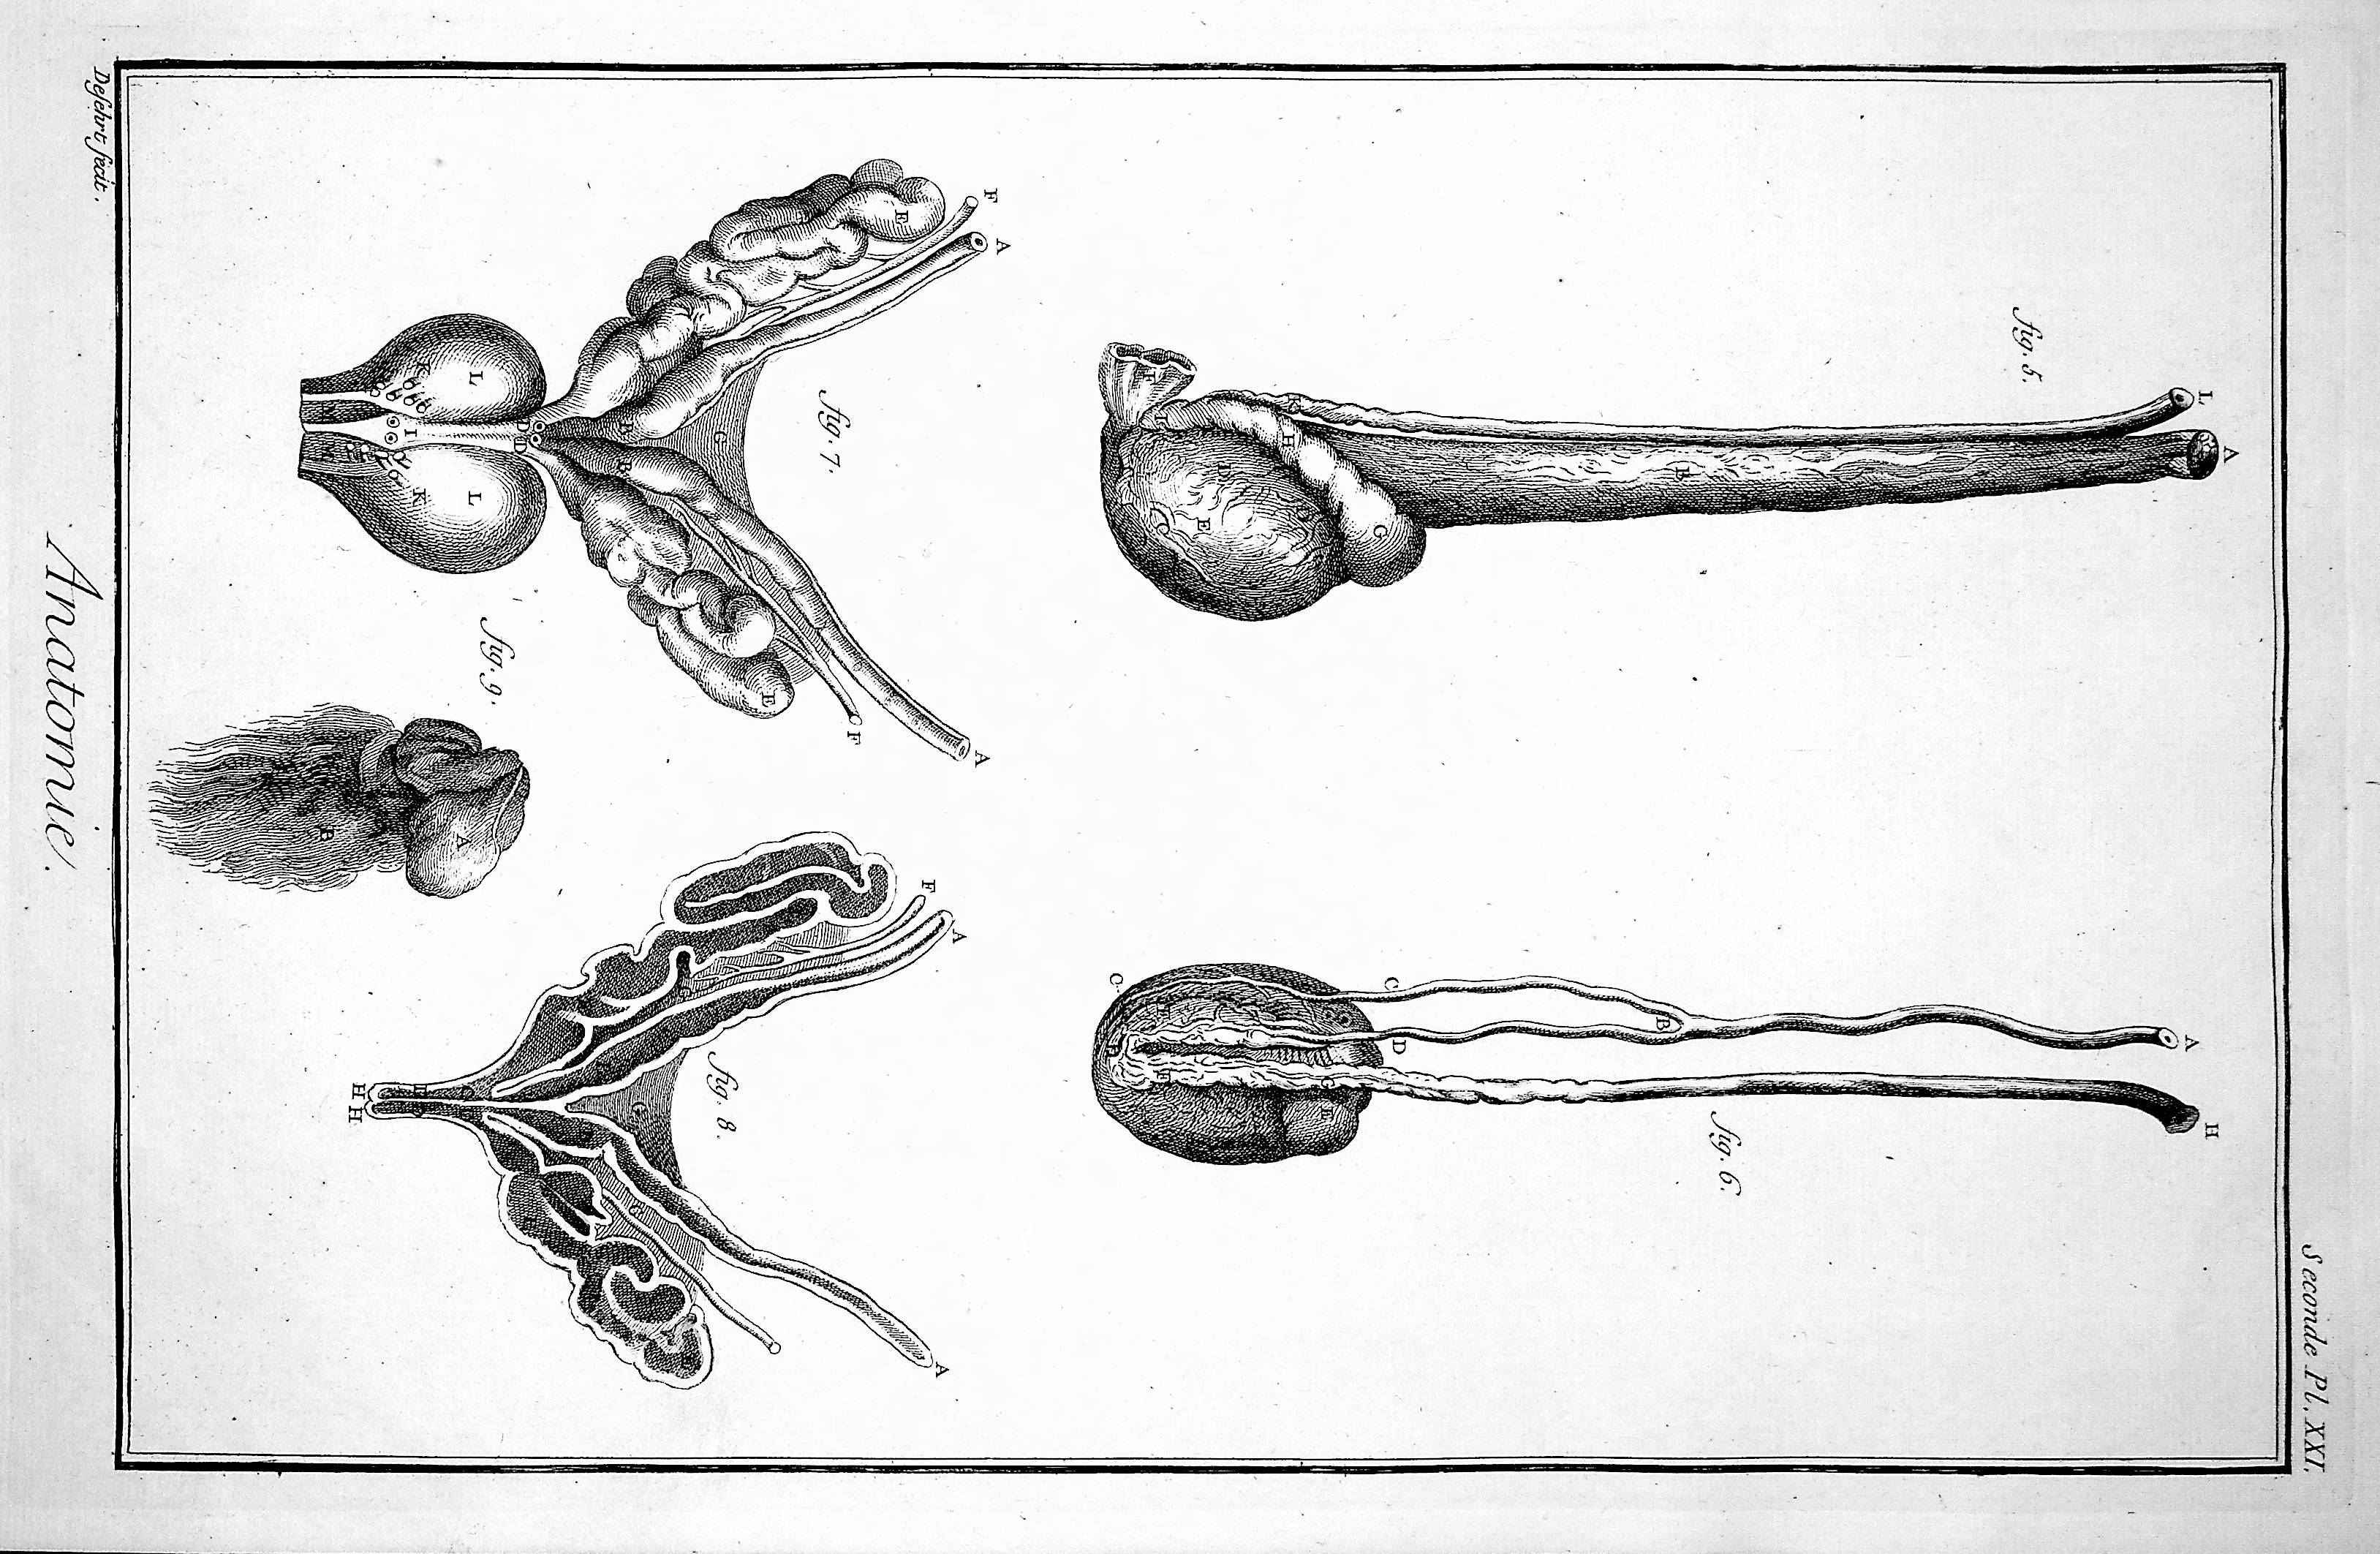 Image for Encyclopedie, Anatomie Plate XXI. The rod [penis], seen from different views, after Ruisch, Heister & Morgagni; TOGETHER WITH Plate XXI No 2. Details of the rod [male reproductive organs], after Graaf & Heister